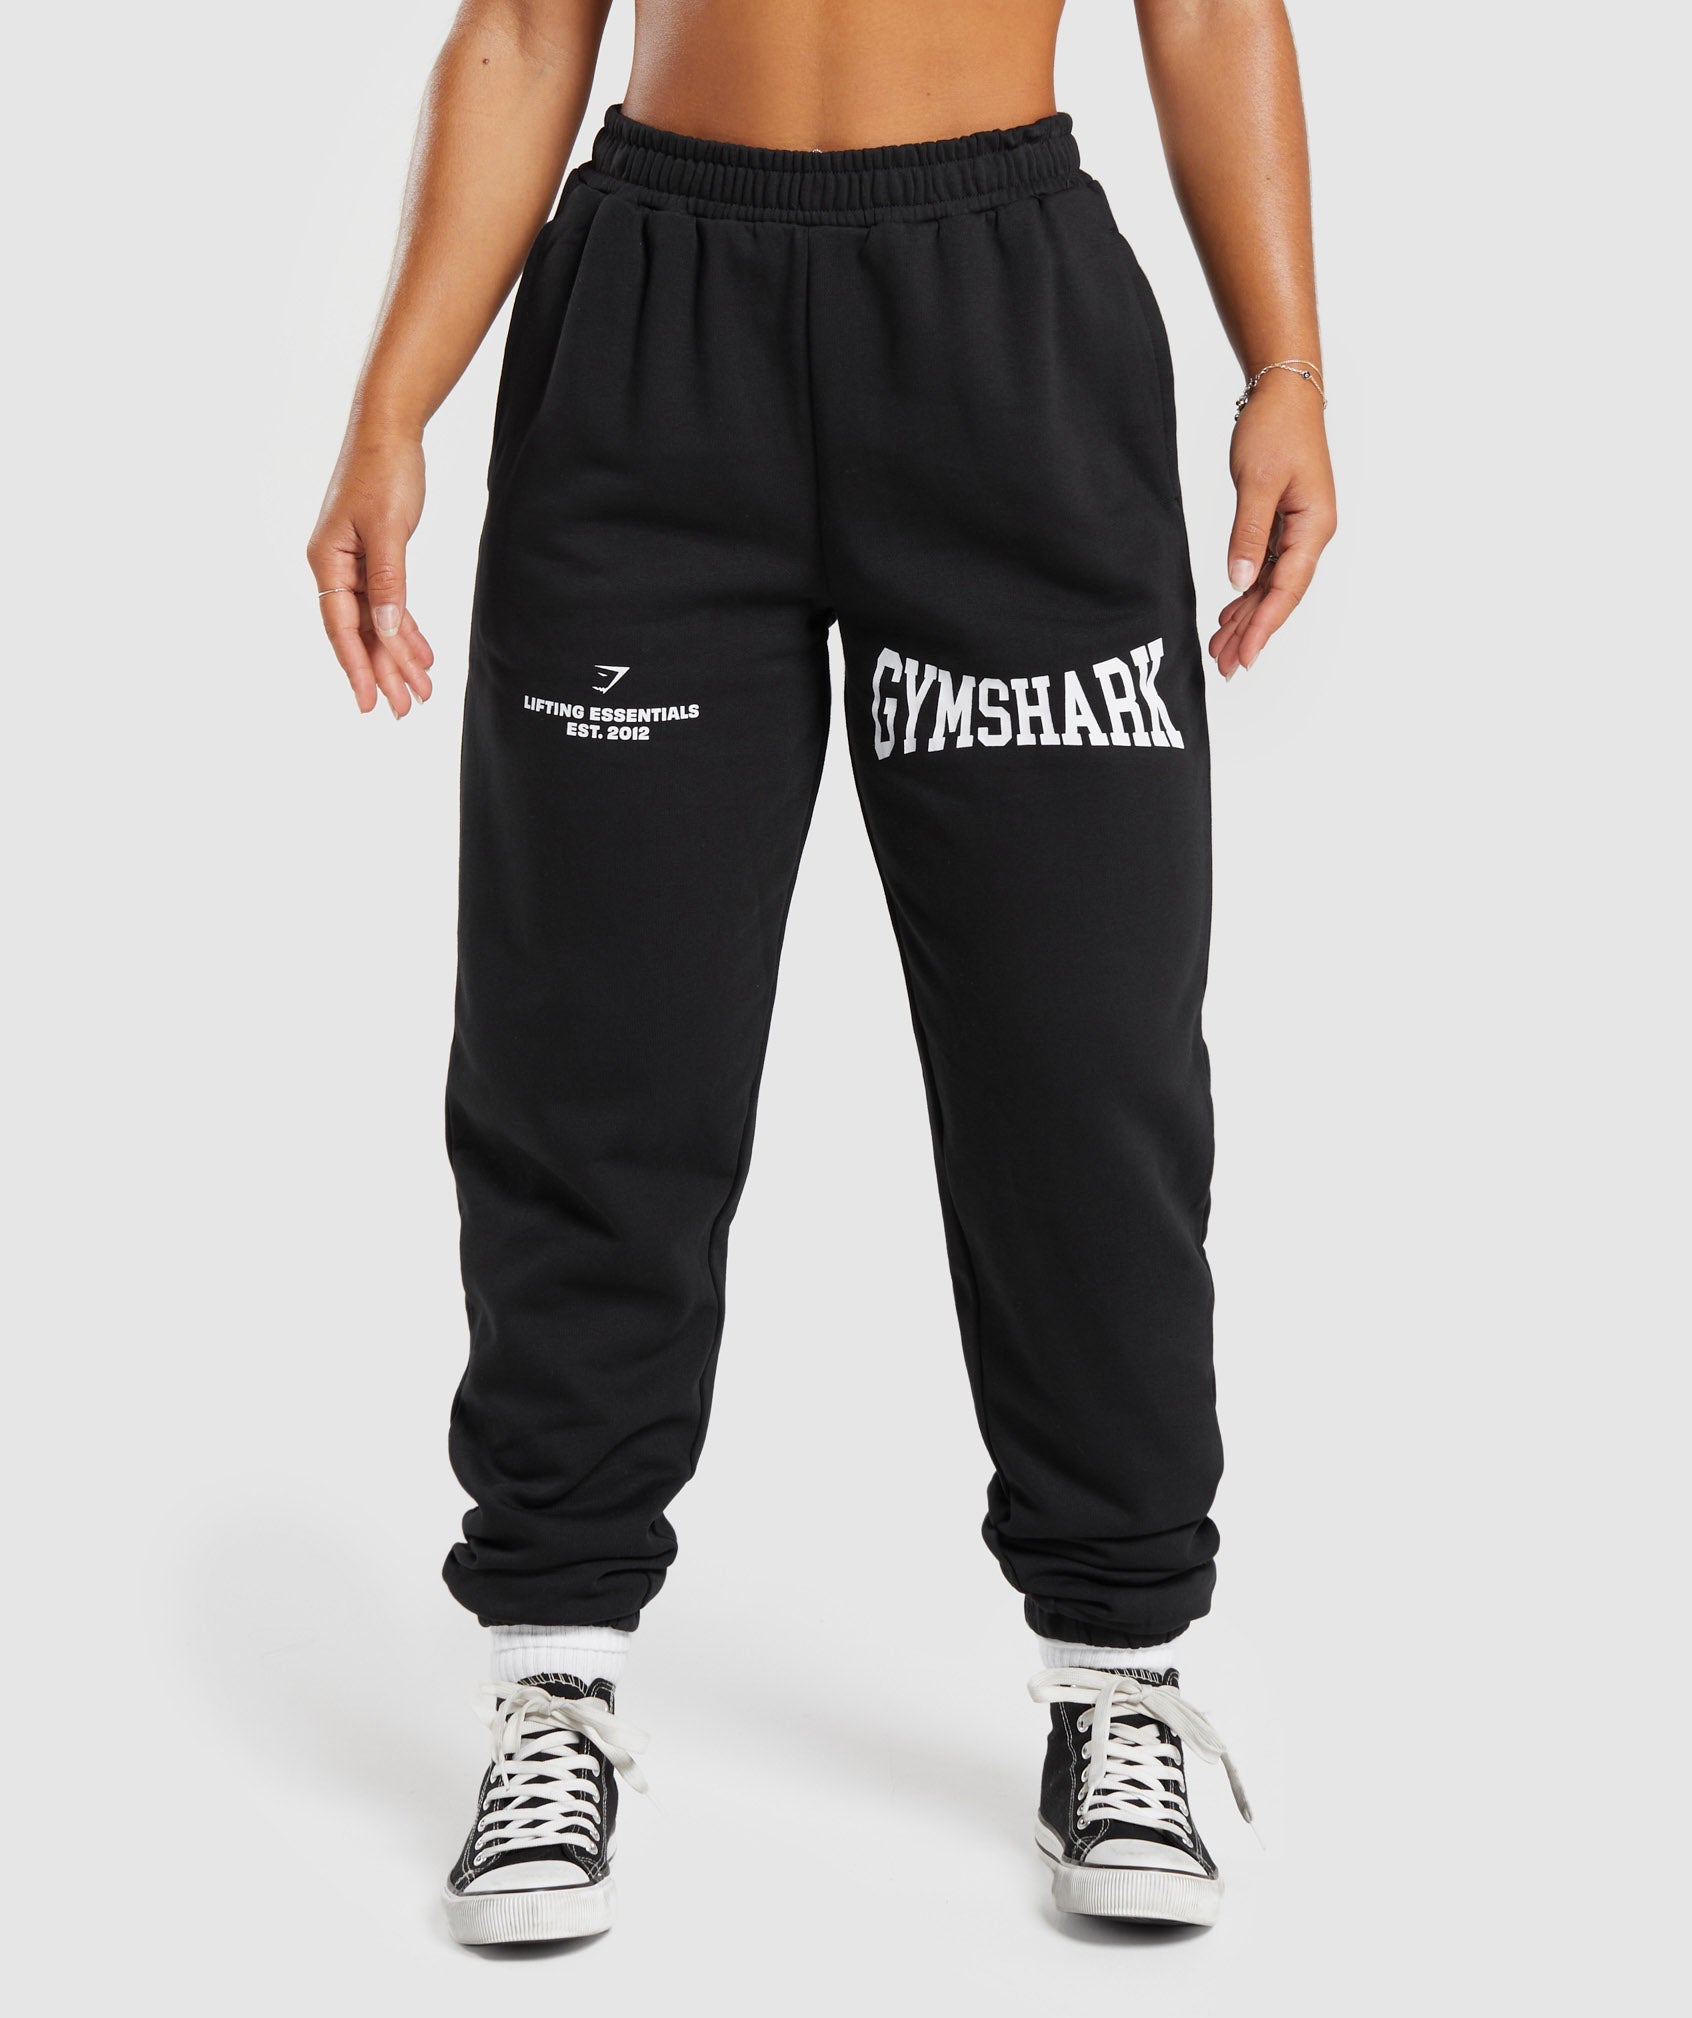 Lifting Essentials Graphic Joggers in Black